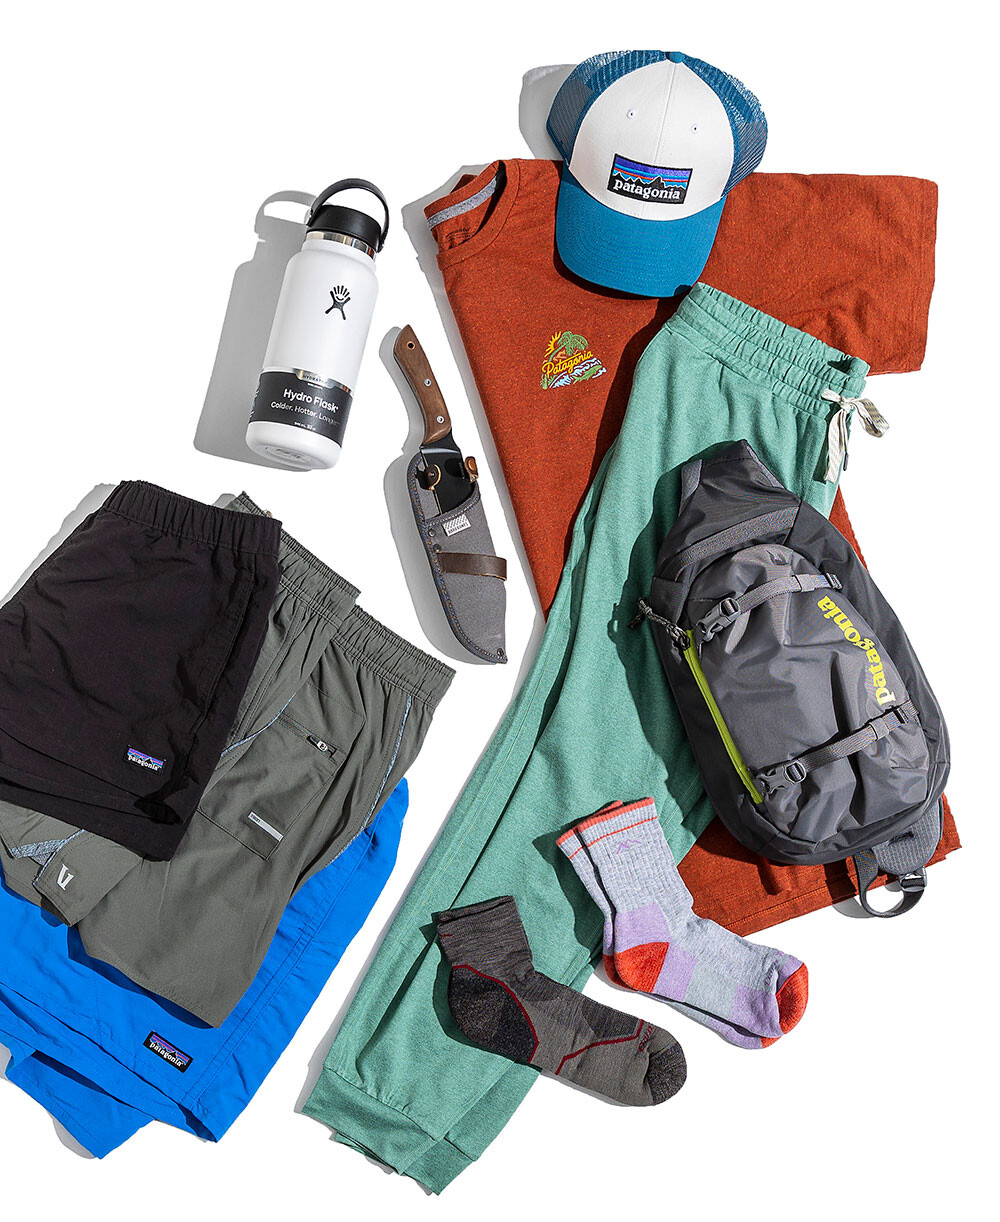 The Hiking Gear And Equipment Essentials for Cold Weather - Travelfoss